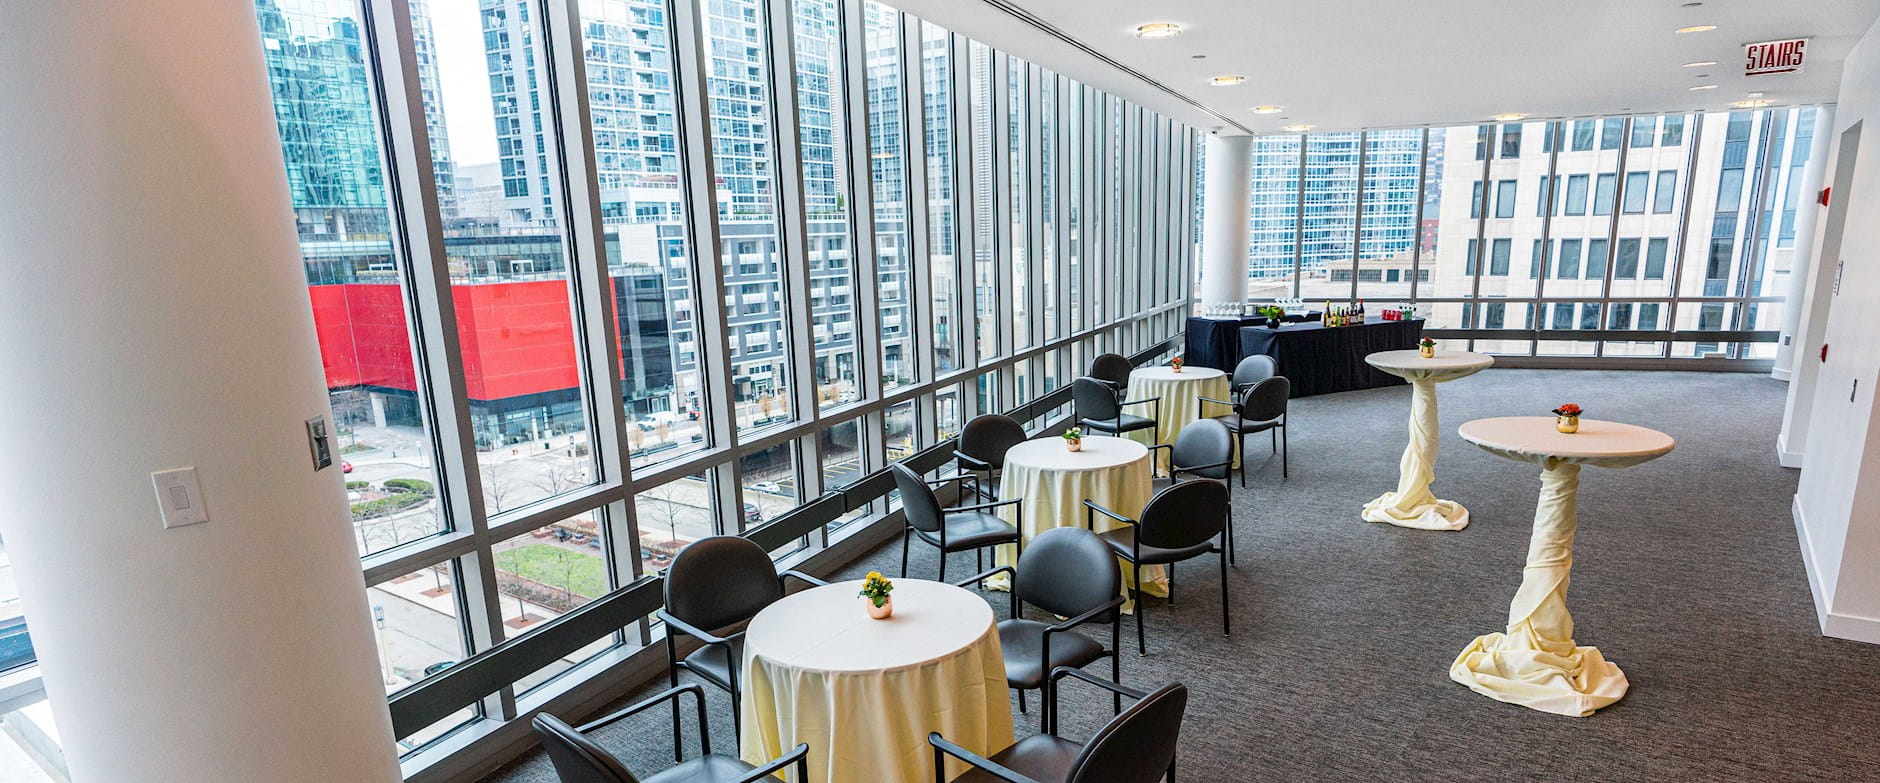 High angle of the Gleacher Center room 650 set with a bar, tables, and chairs